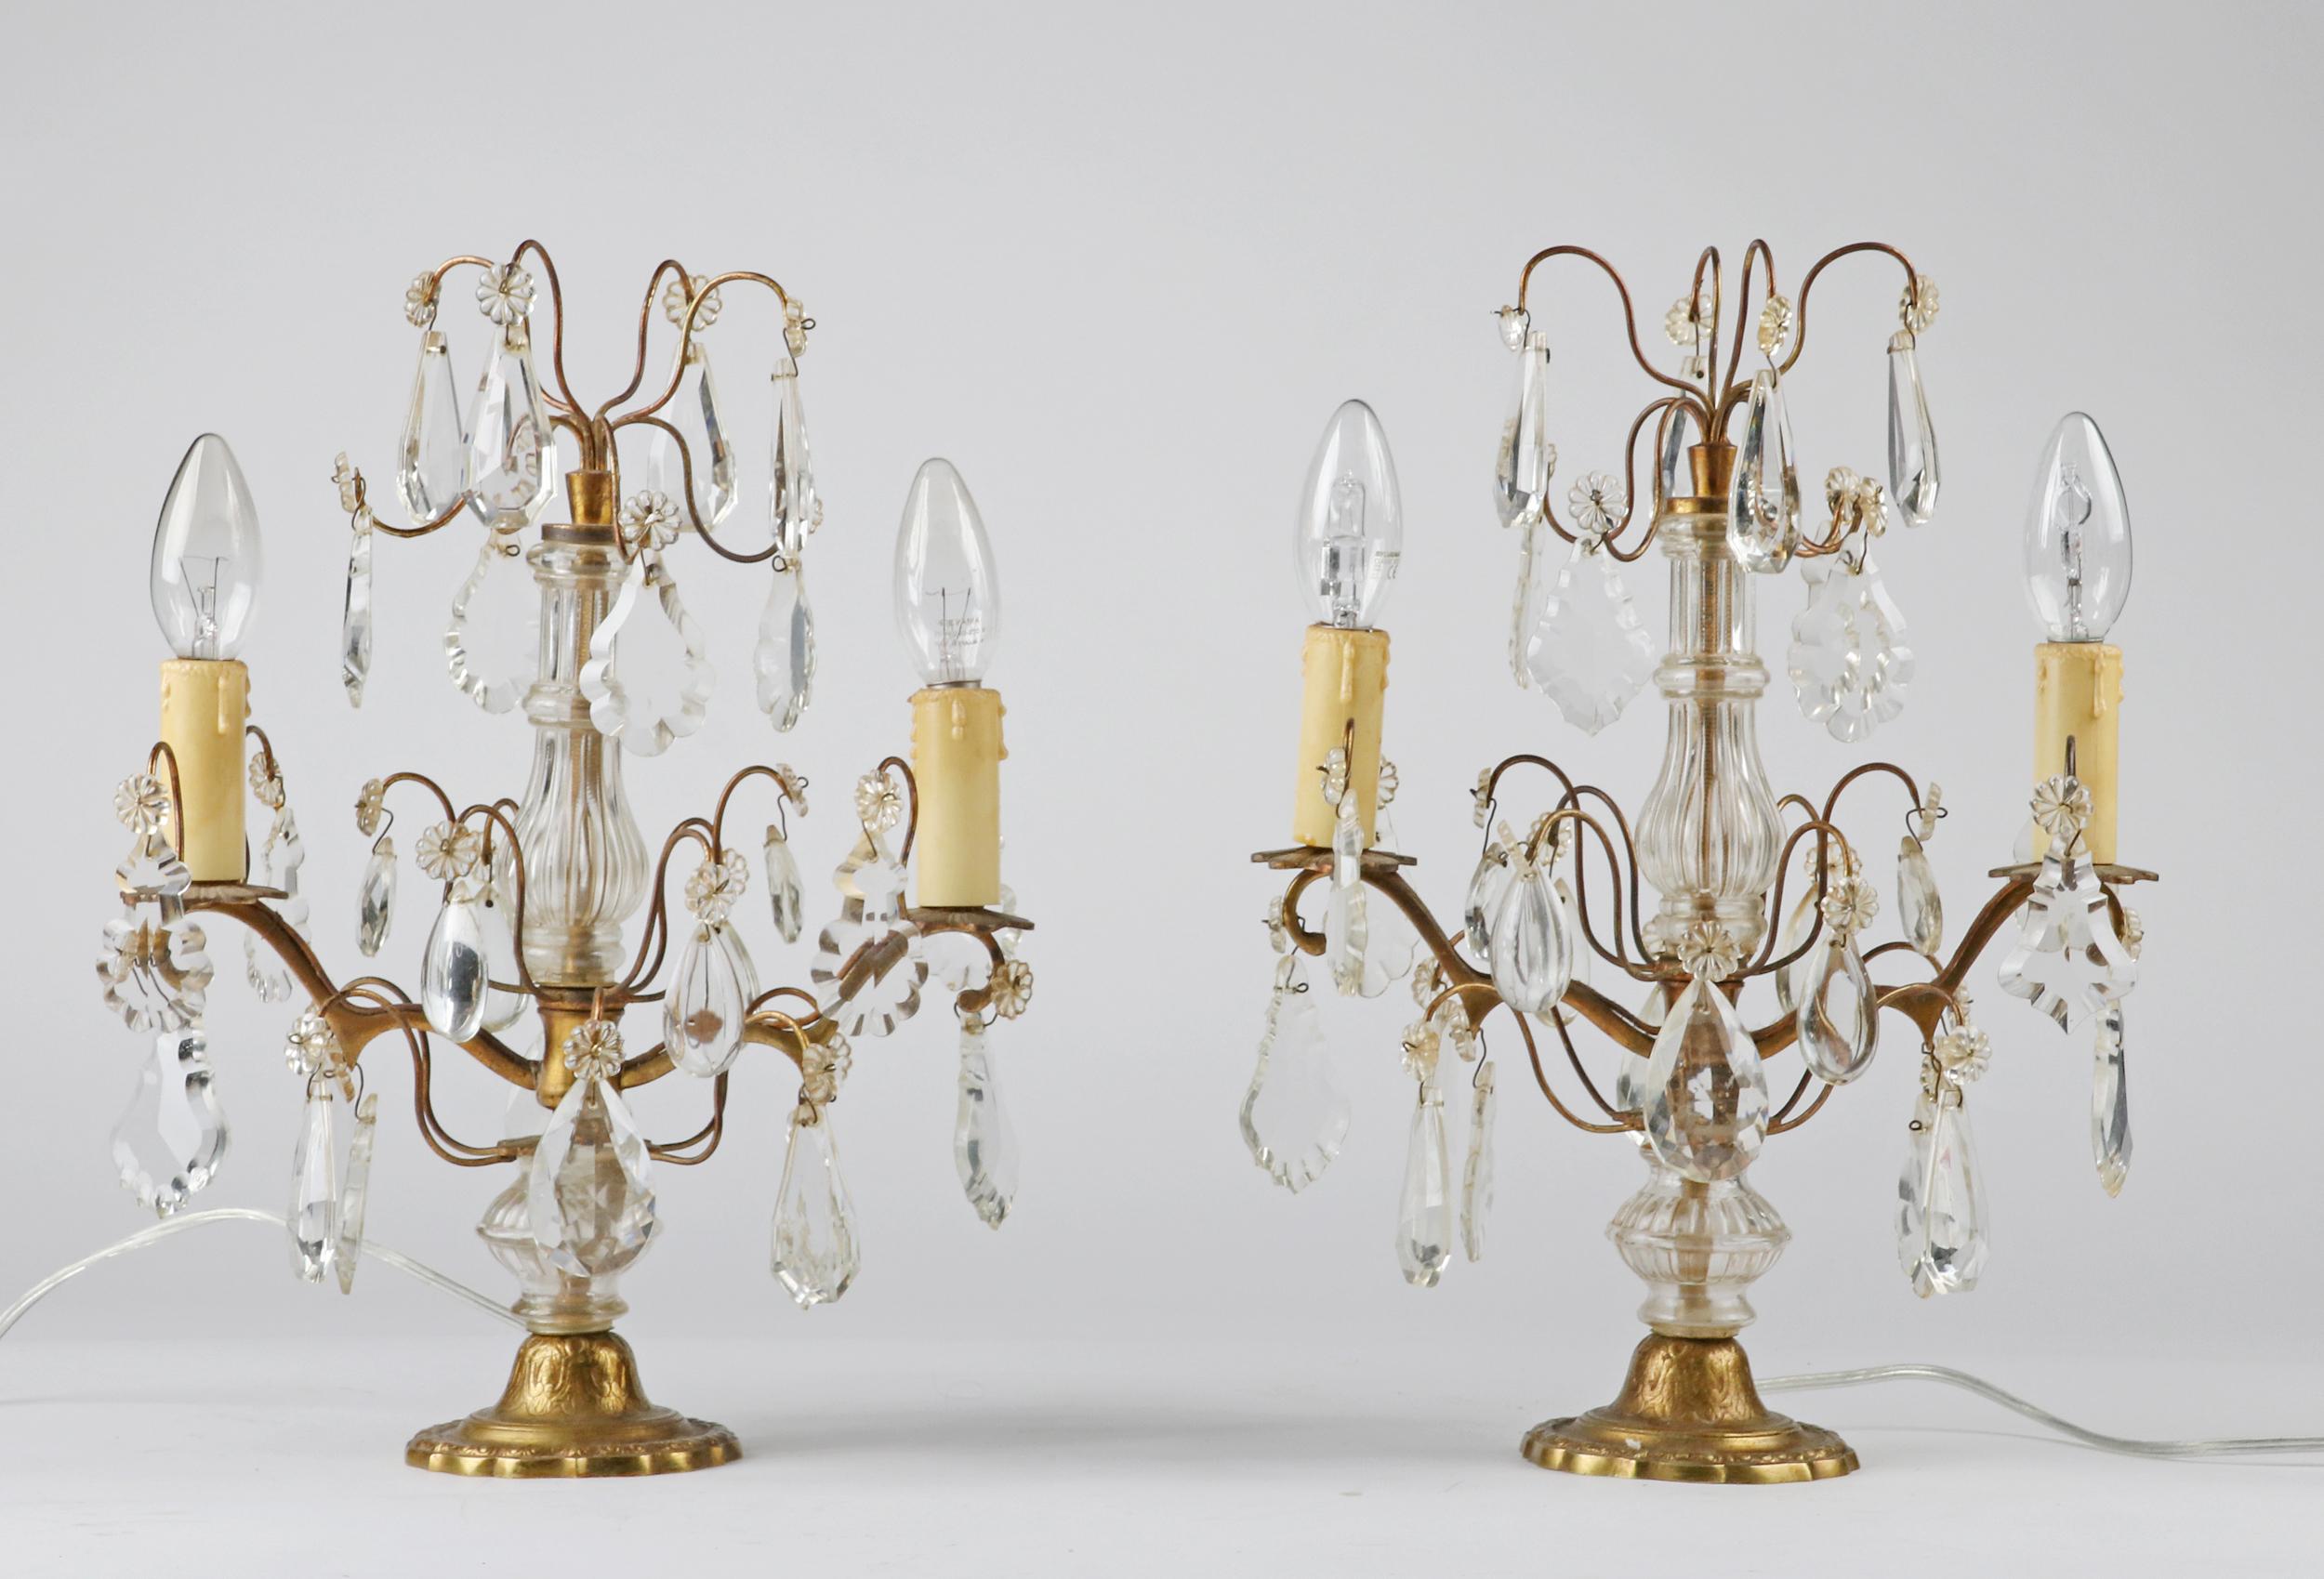 A pair of antique table lamps, also called in France 